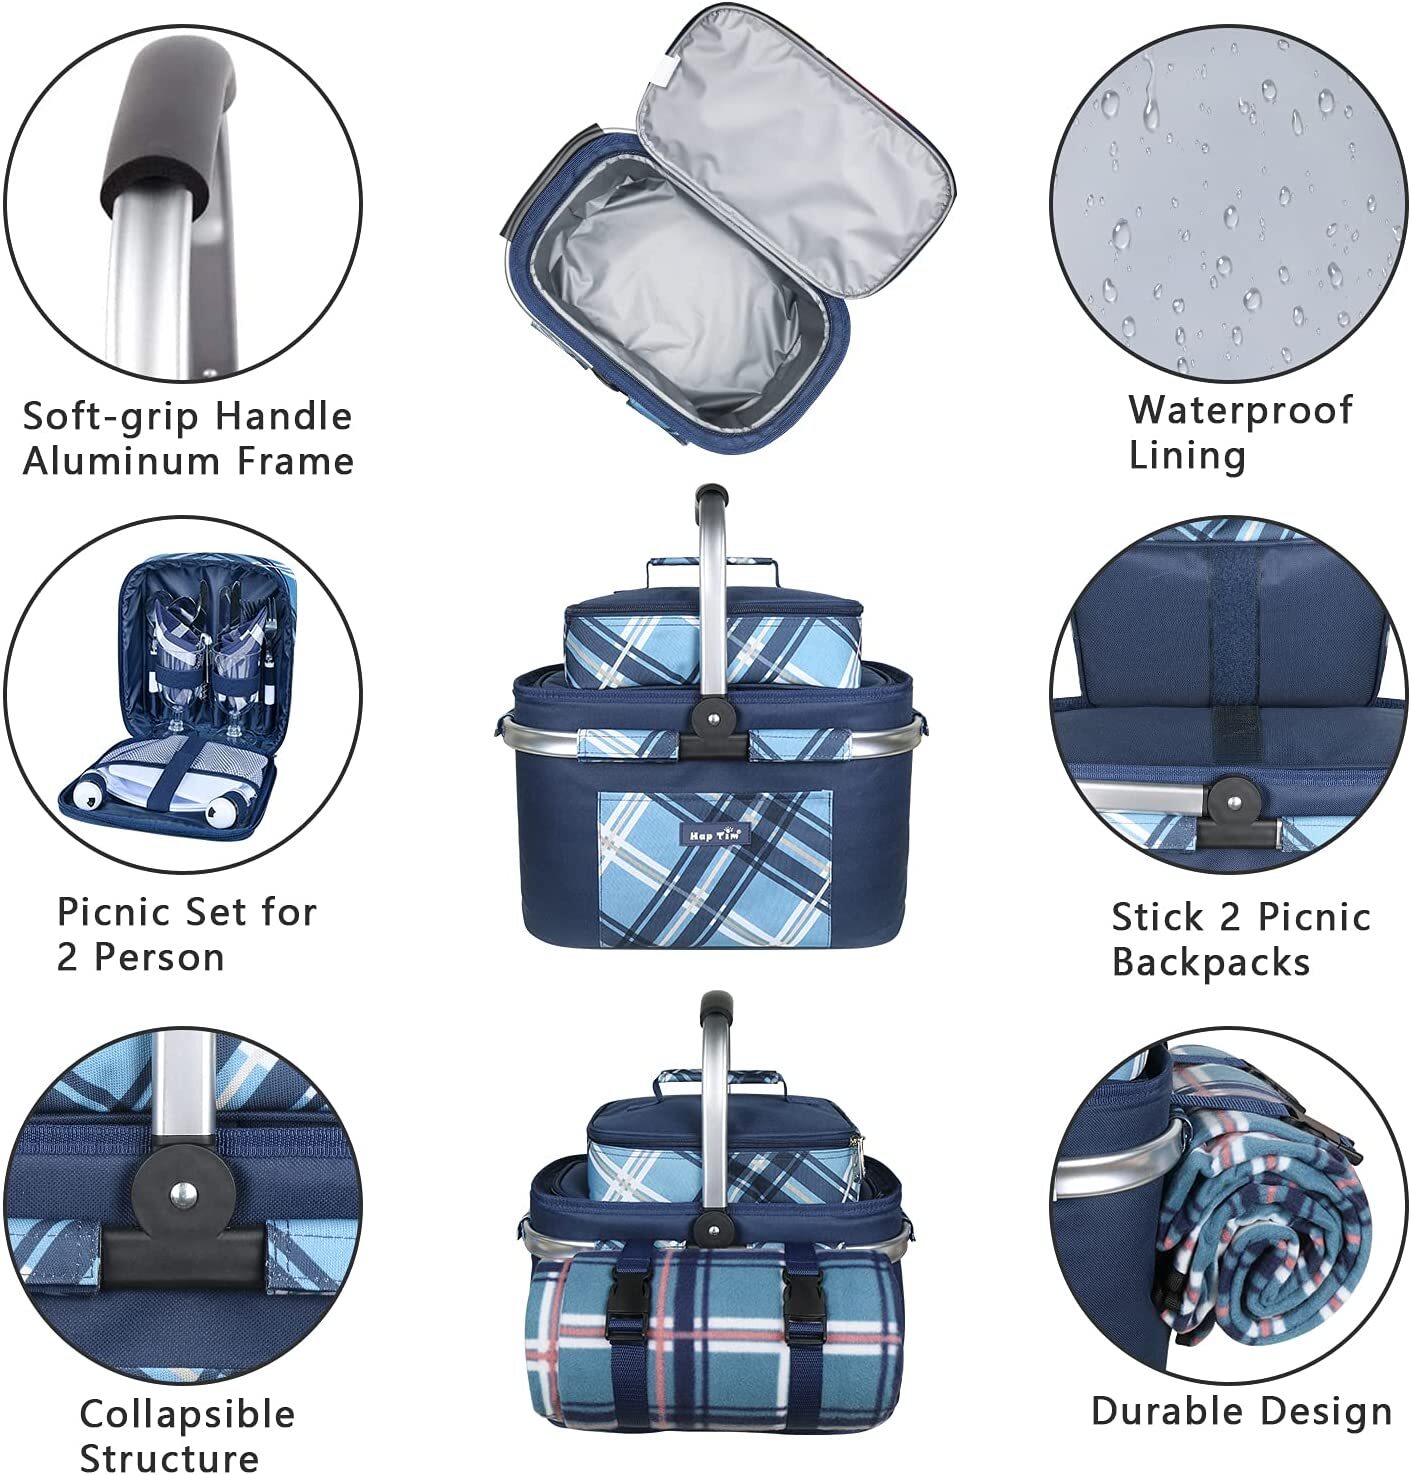 Best Hap Tim Picnic Basket Set for 2 Person with Roomy Insulated